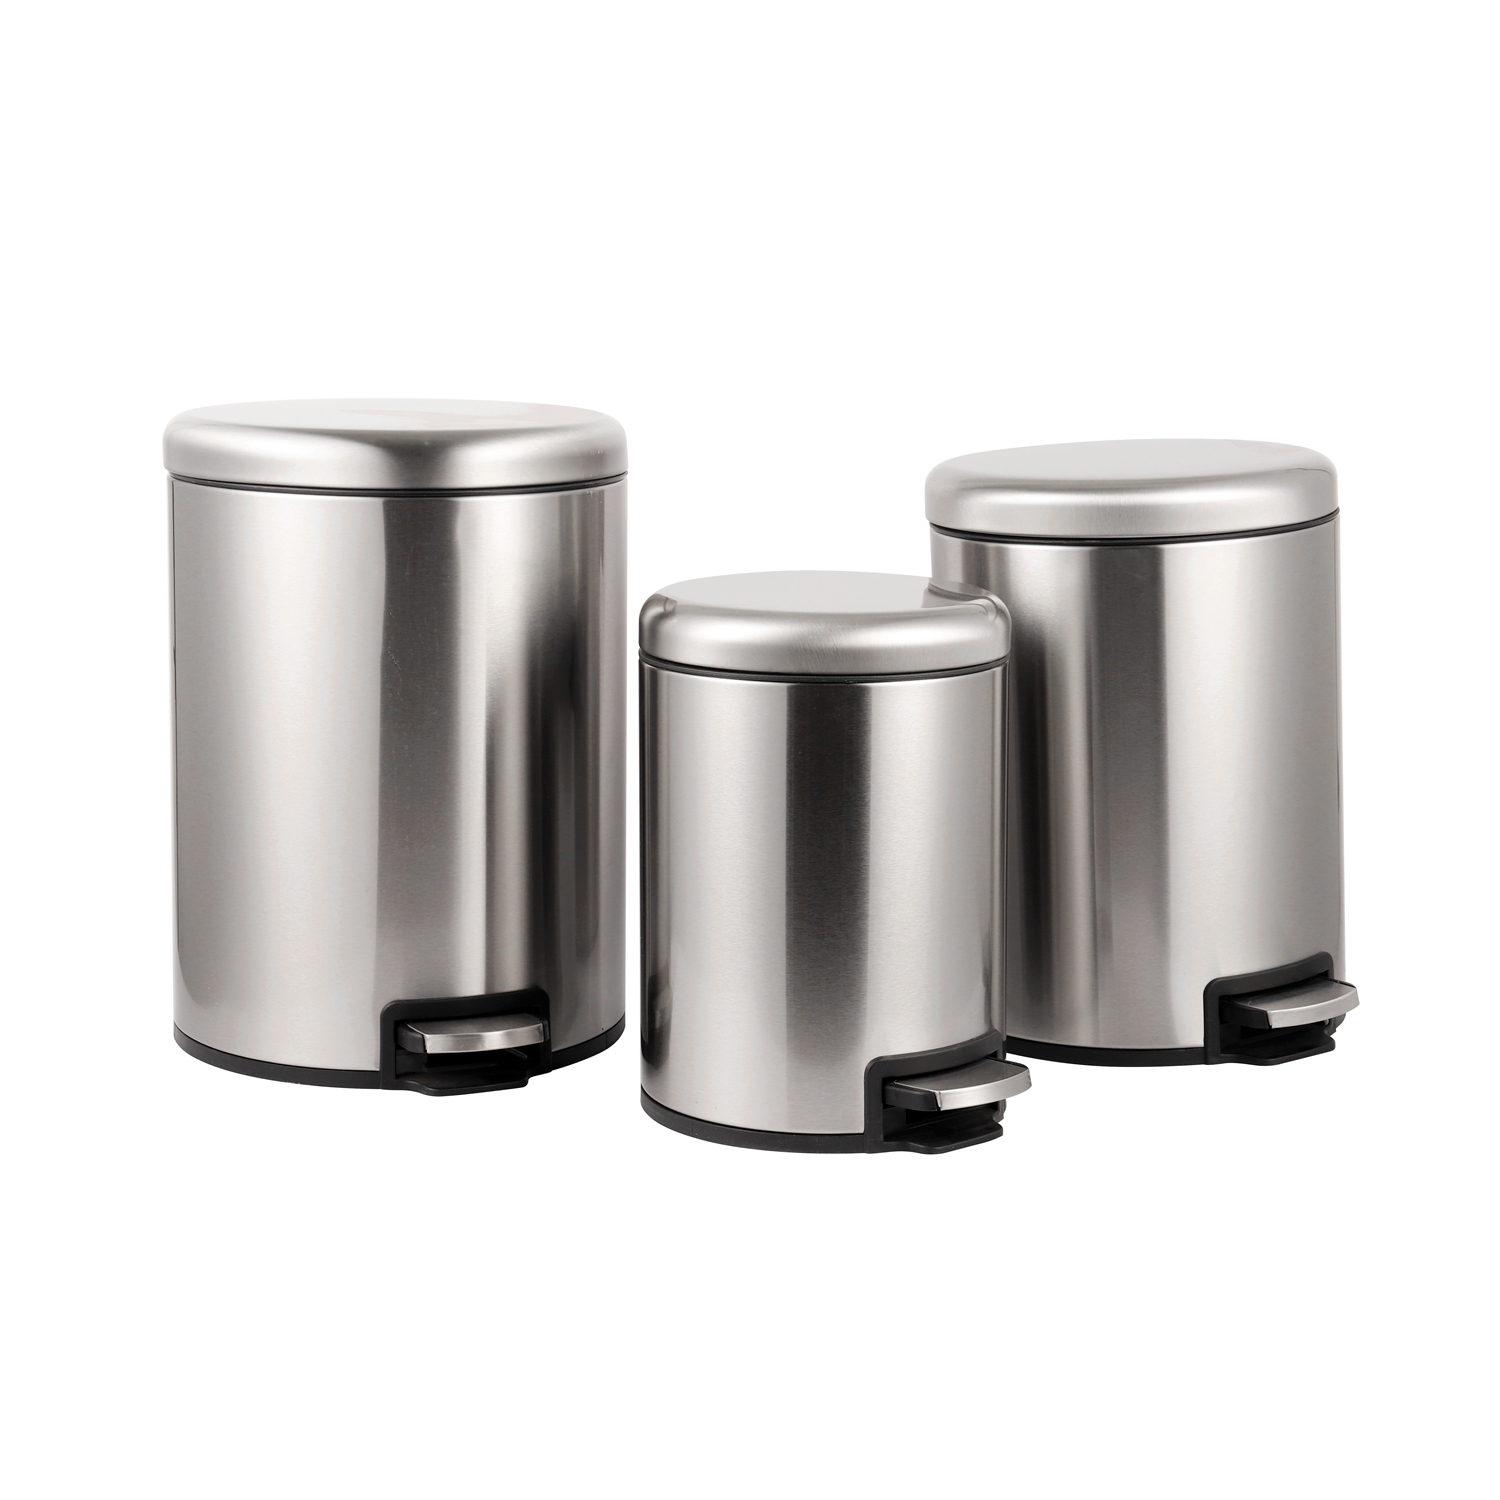 Stainless steel Circle Foot pedal trash can with soft close for Hotel